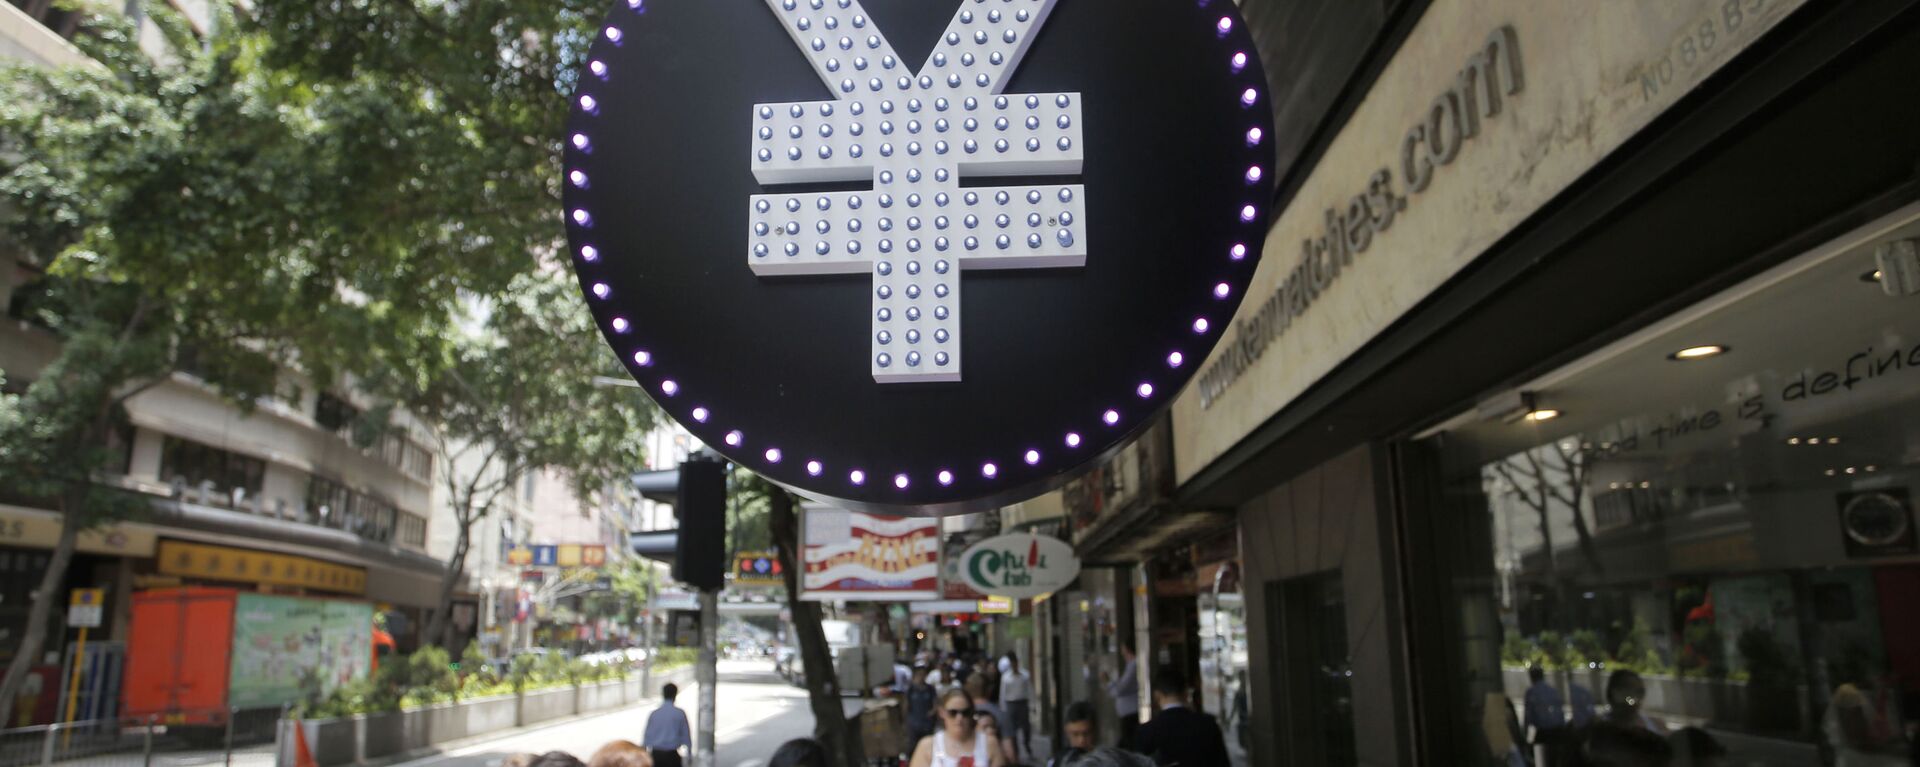 A Chinese yuan sign is seen at a currency exchange shop in Hong Kong, Tuesday, Aug. 11, 2015. China devalued its tightly controlled currency Tuesday following a slump in trade, allowing the yuan's biggest one-day decline in a decade. (AP Photo/Vincent Yu) - Sputnik International, 1920, 08.02.2021